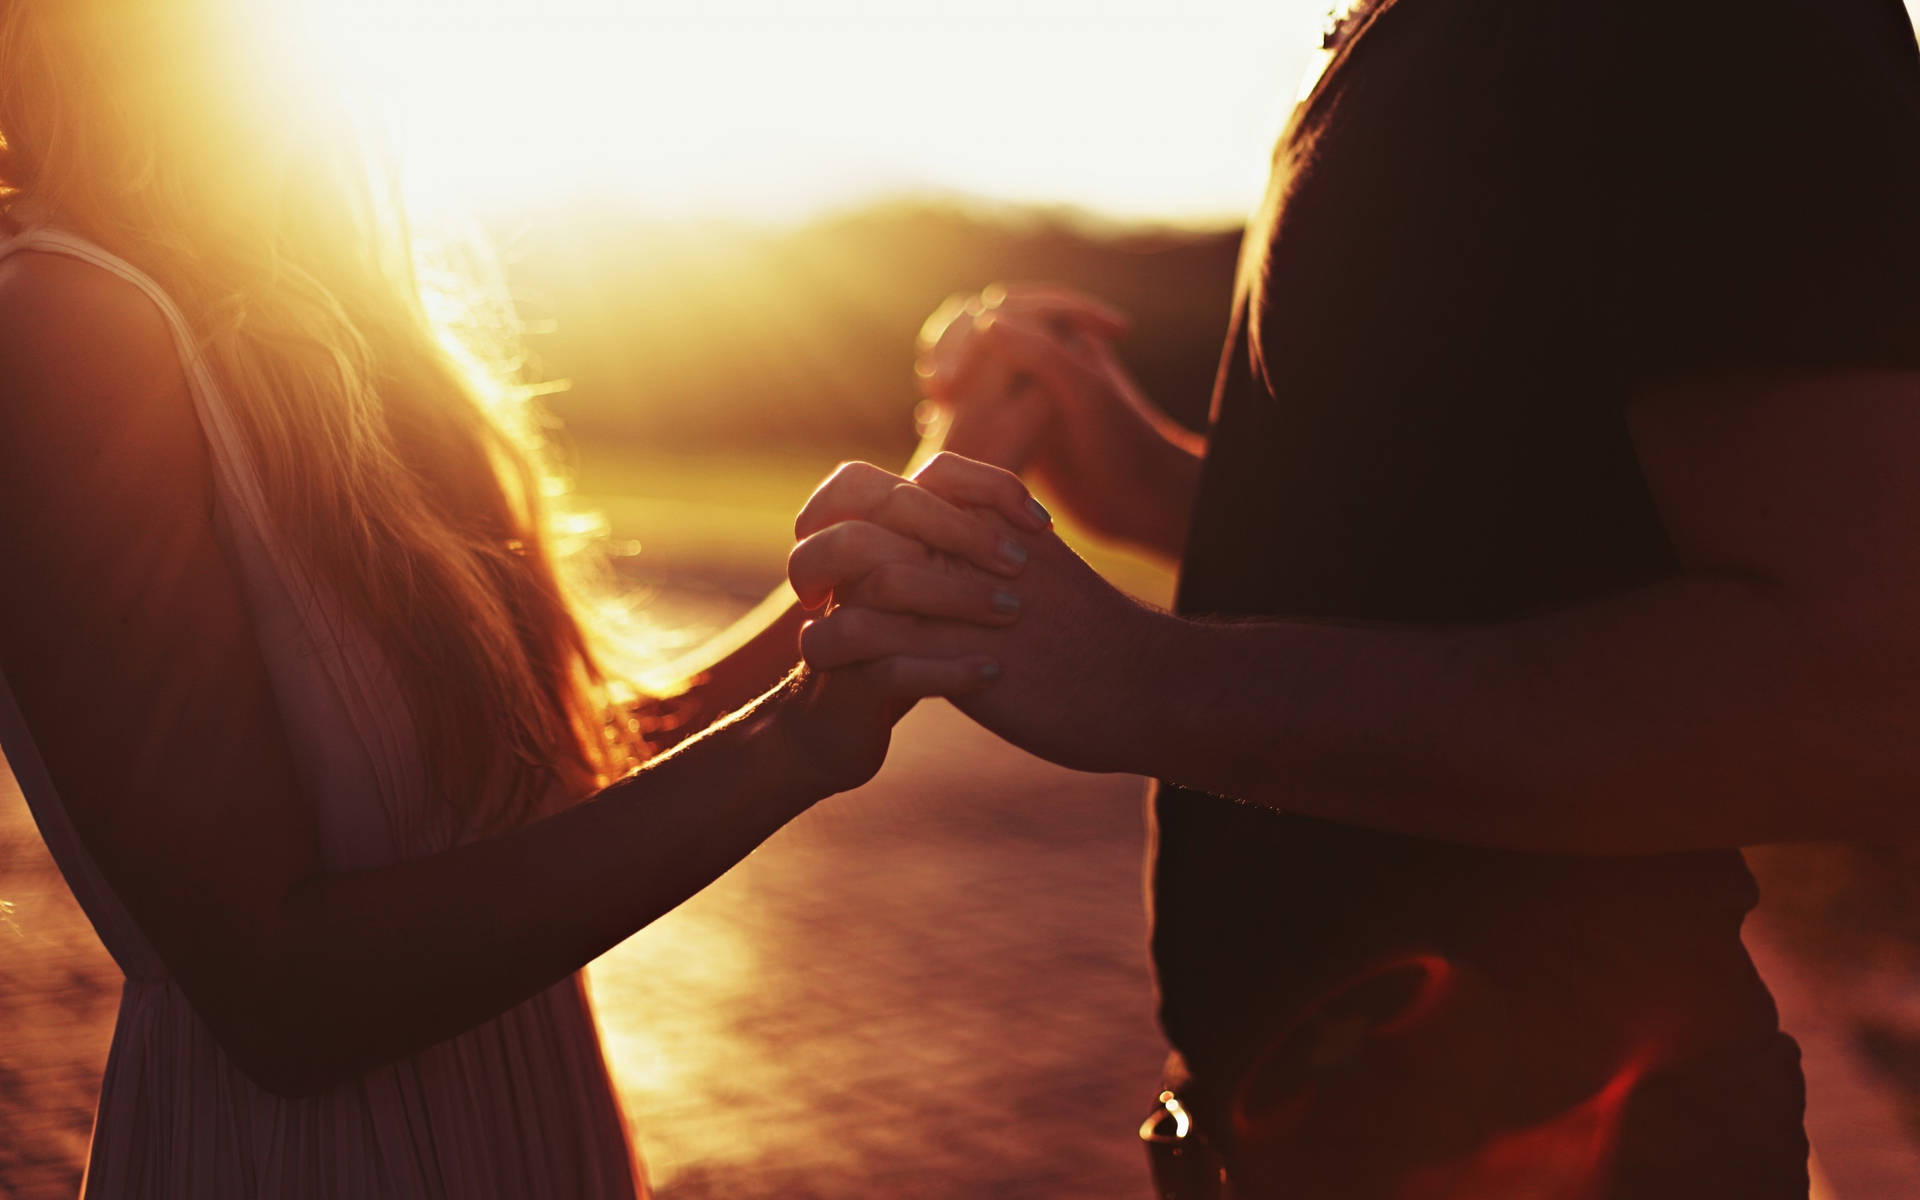 Holding Hands While Facing Each Other At Sunset